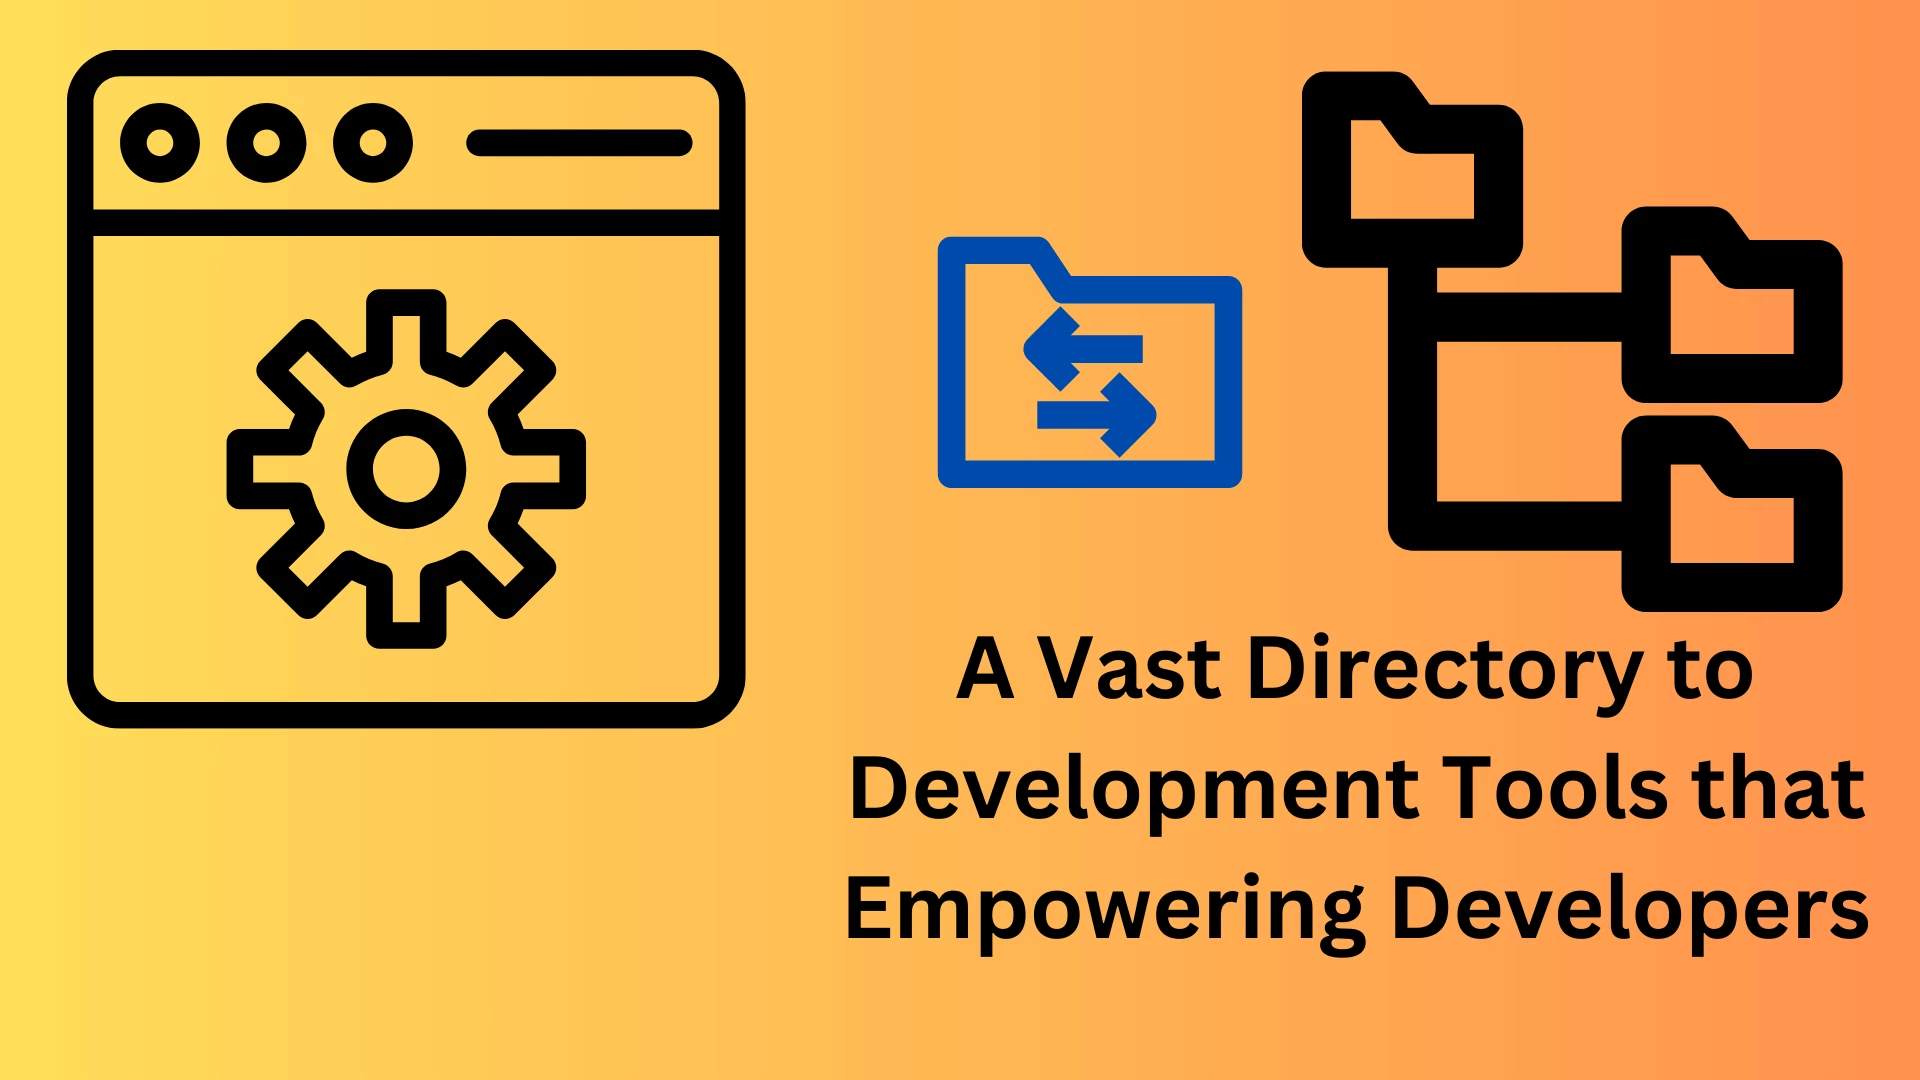 A Vast Directory to Development Tools that Empowering Developers